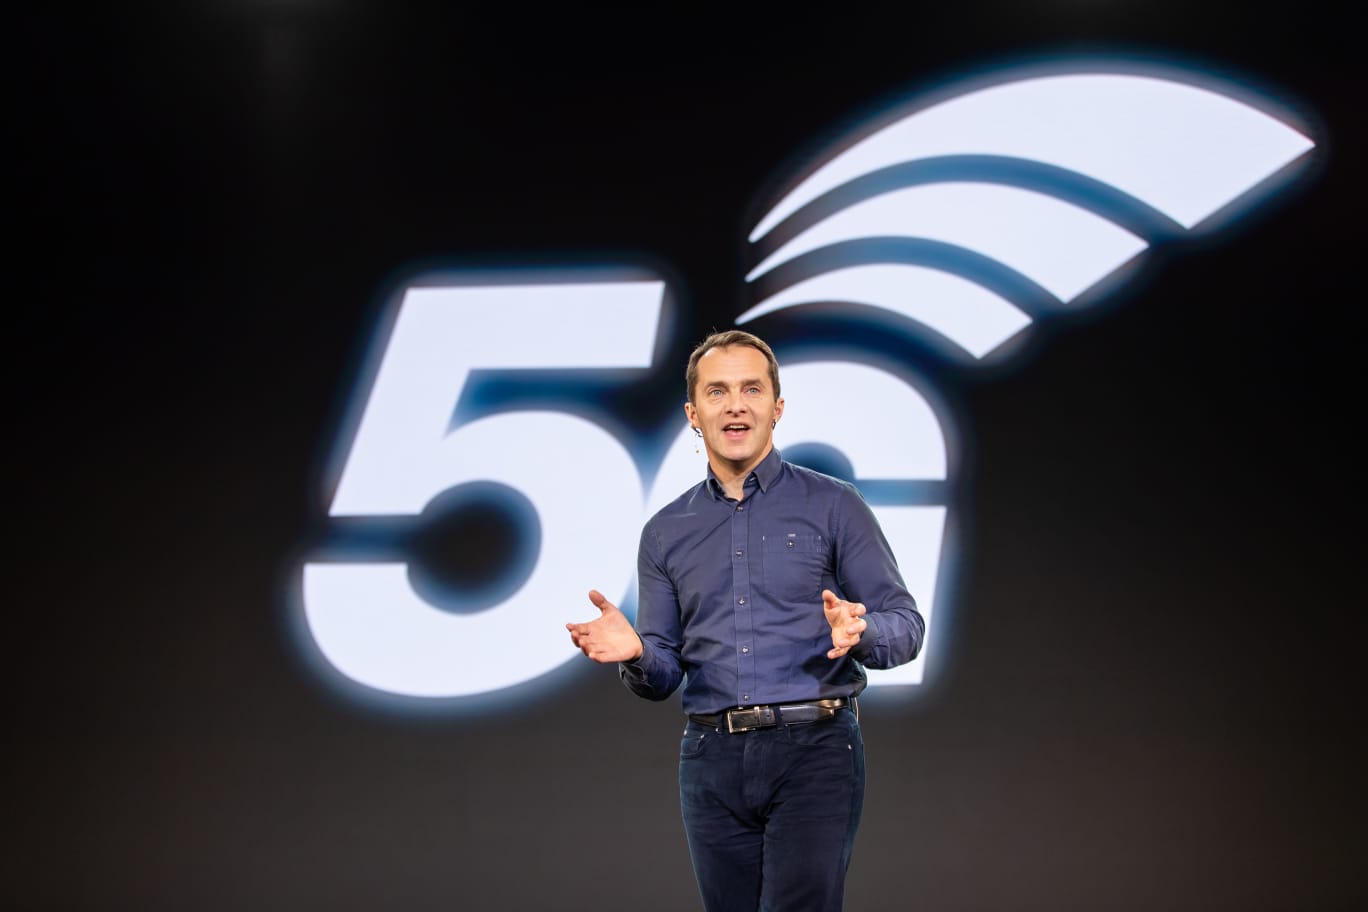 Pierce is evangelical about the transition to 5G